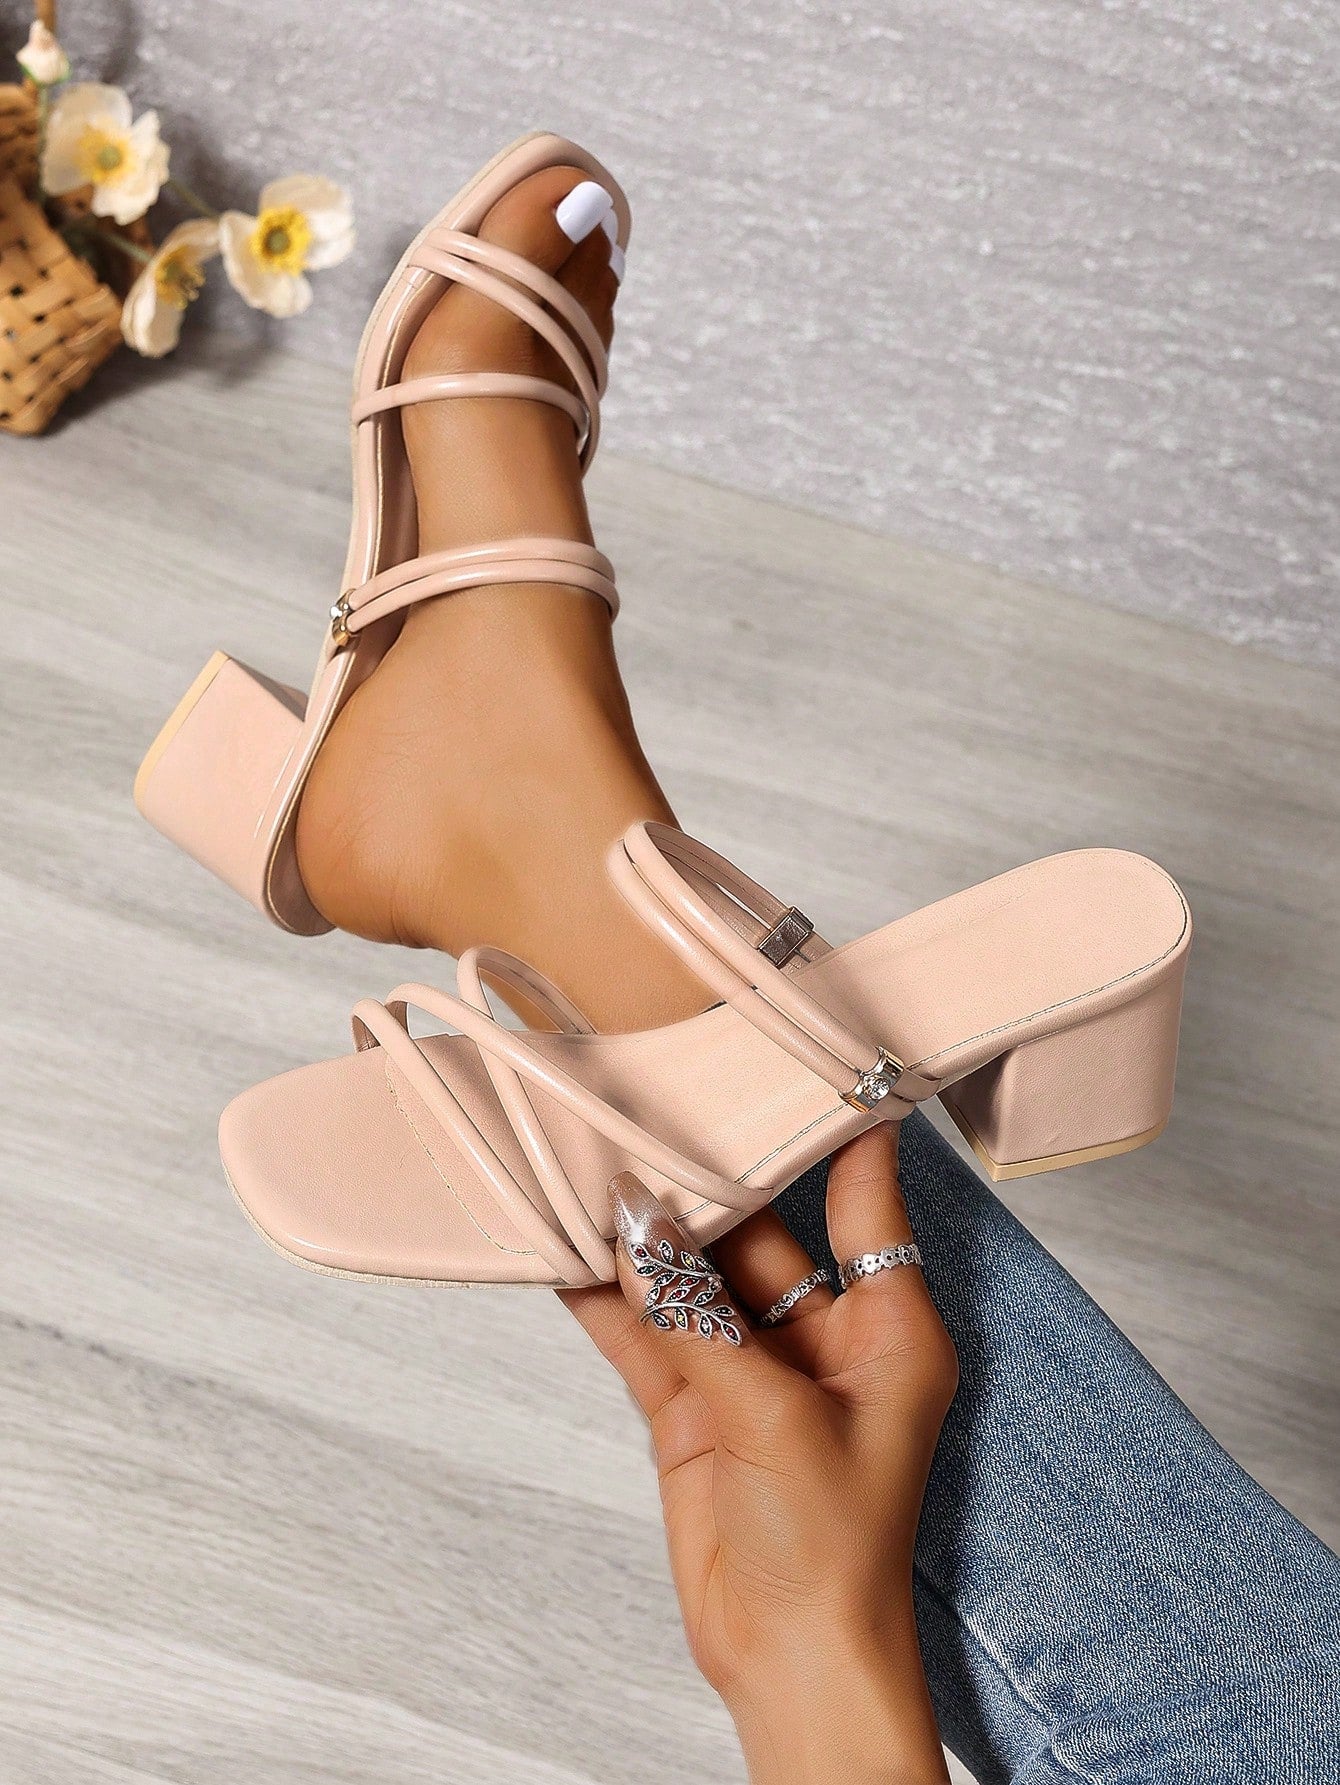 Trendy Square-Toe Sandals with Block Heel: Casual Chic for Every Occasion